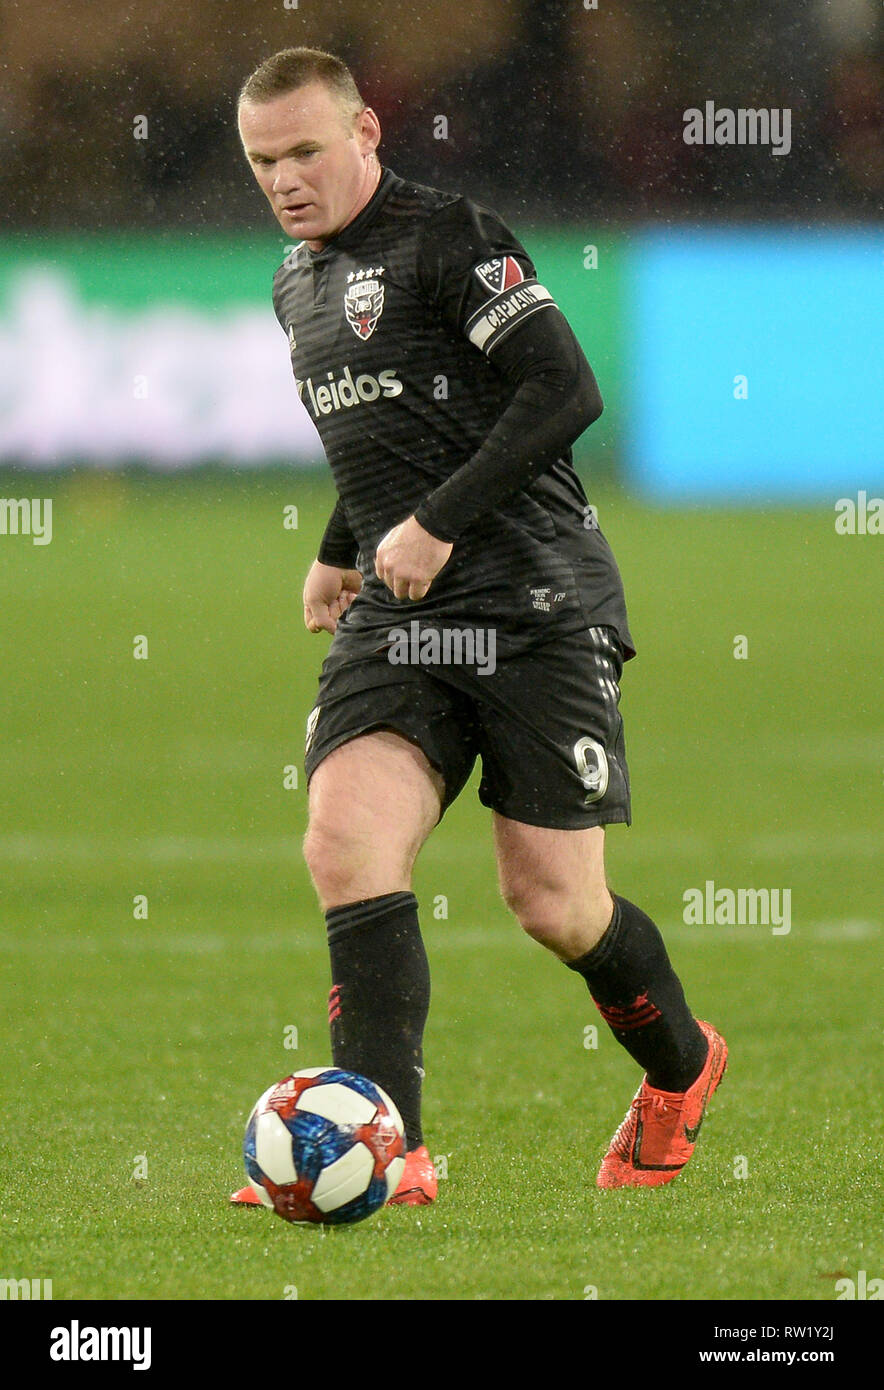 Washington, DC, USA. 3rd Mar, 2019. 20190303 - D.C. United forward WAYNE ROONEY (9) passes against Atlanta United FC during a steady rain in the first half at Audi Field in Washington. Credit: Chuck Myers/ZUMA Wire/Alamy Live News Stock Photo